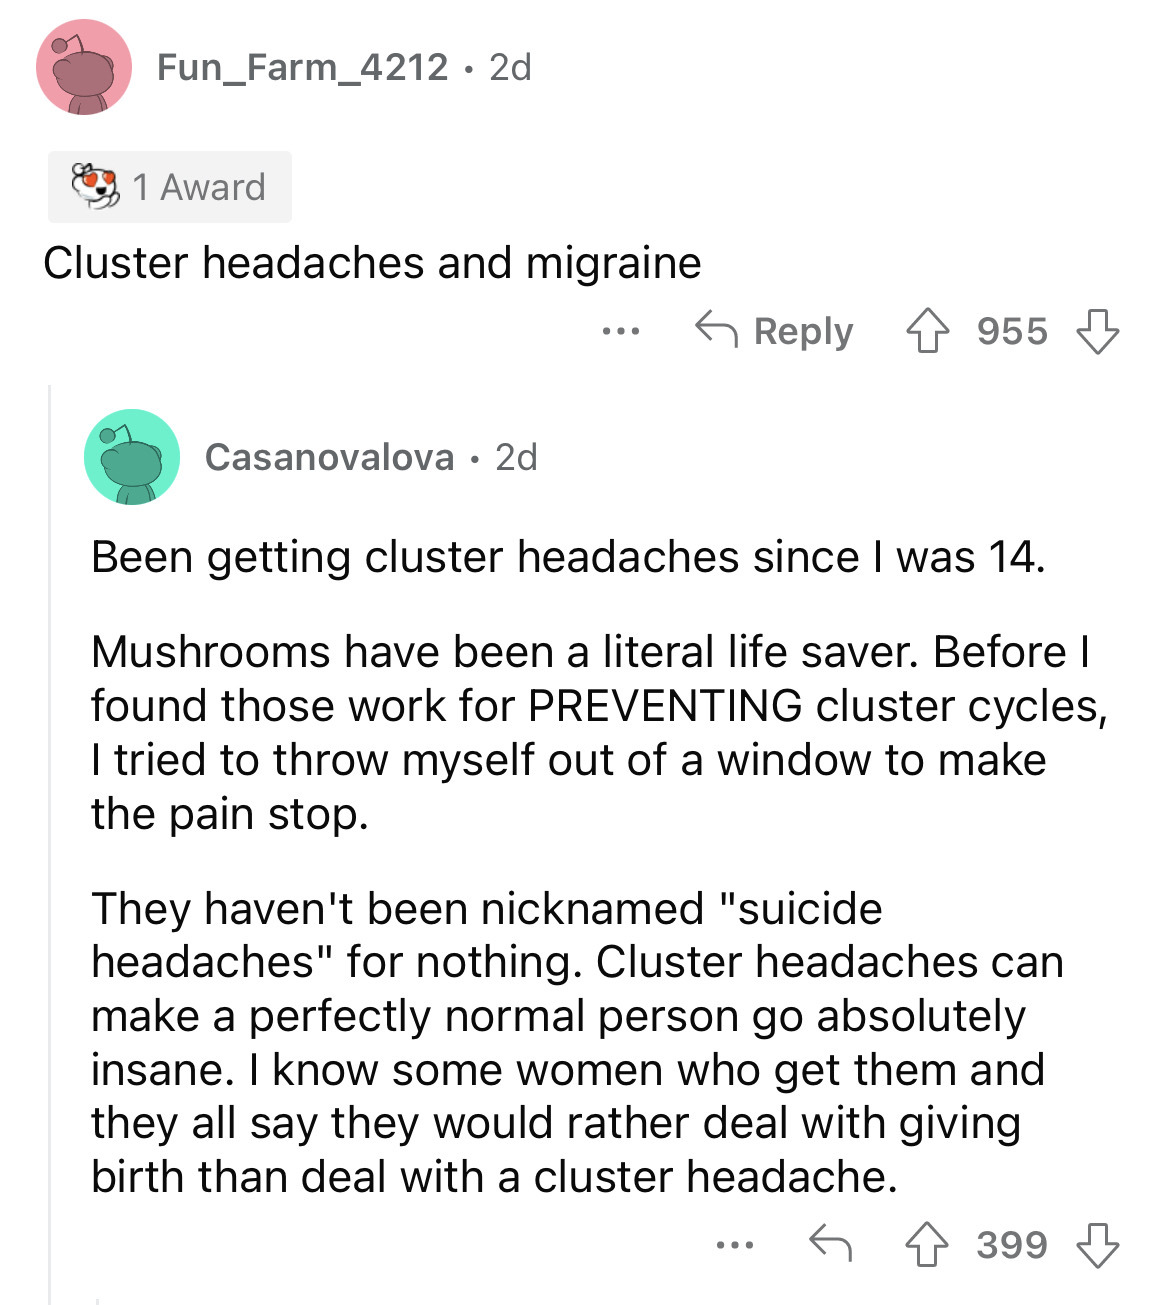 angle - Fun_Farm_4212 2d 1 Award Cluster headaches and migraine Casanovalova 2d 955 Been getting cluster headaches since I was 14. Mushrooms have been a literal life saver. Before I found those work for Preventing cluster cycles, I tried to throw myself o